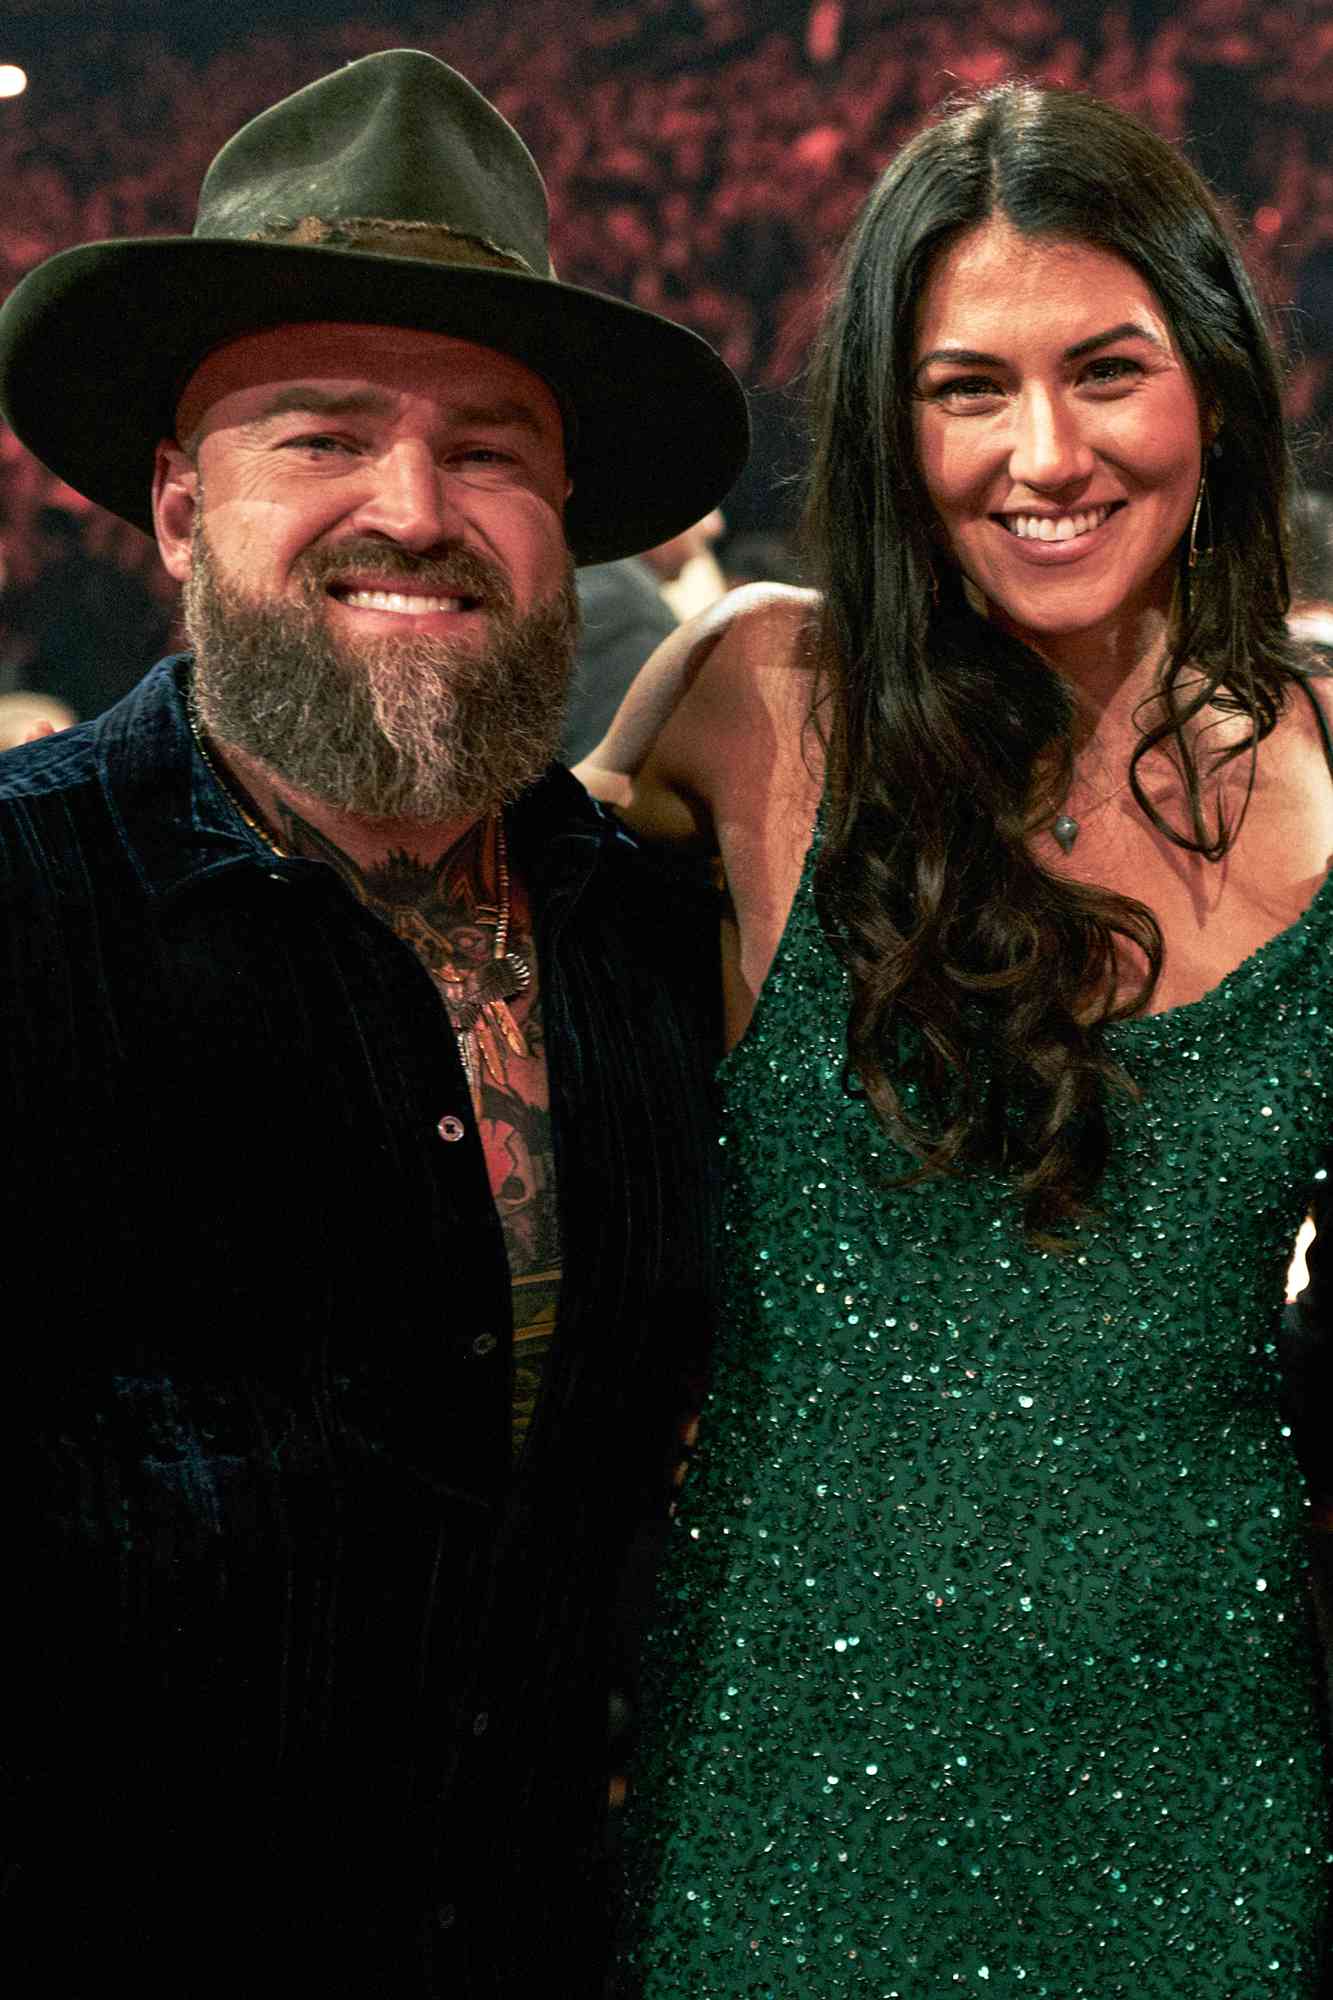 Zac Brown Feud: Wife Fights Back Over IG Post